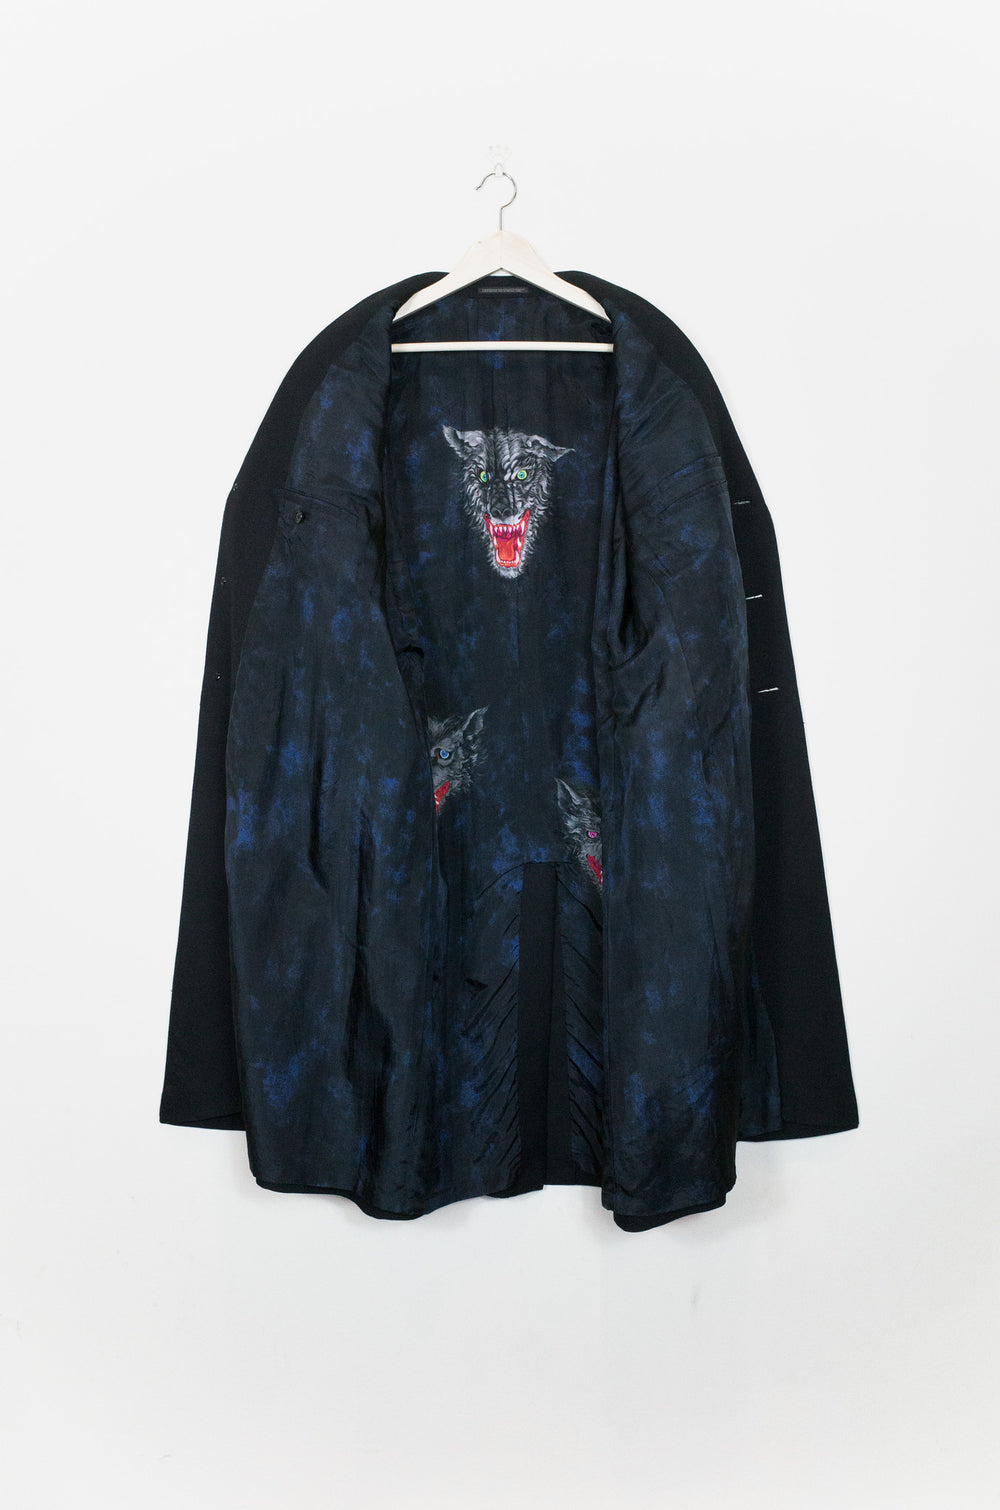 Yohji Yamamoto Pour Homme AW09 Cerberus Lining Chester